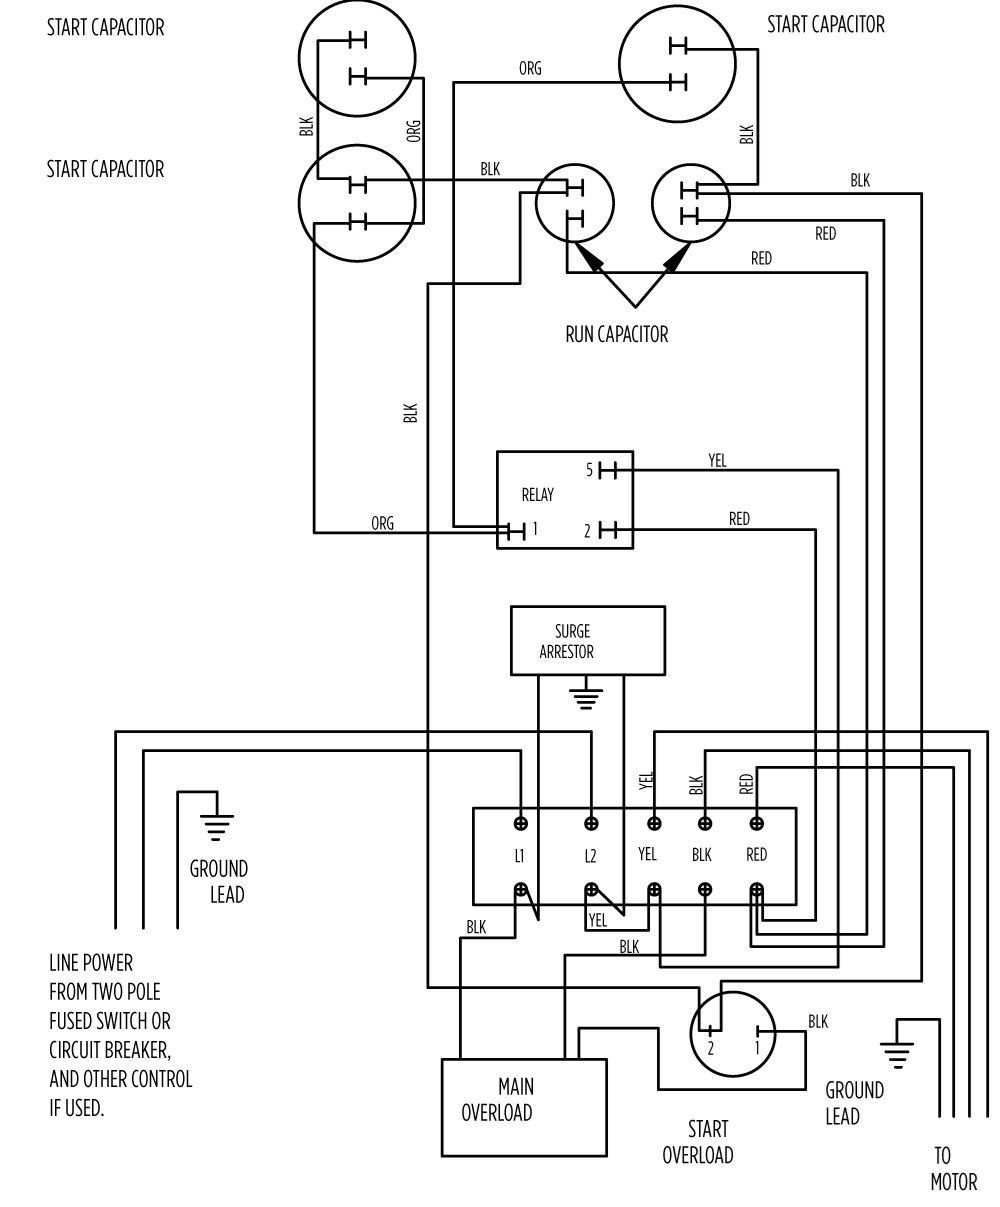 Primary Single Phase Capacitor Wiring Diagram | Wiring Library - Electric Motor Capacitor Wiring Diagram